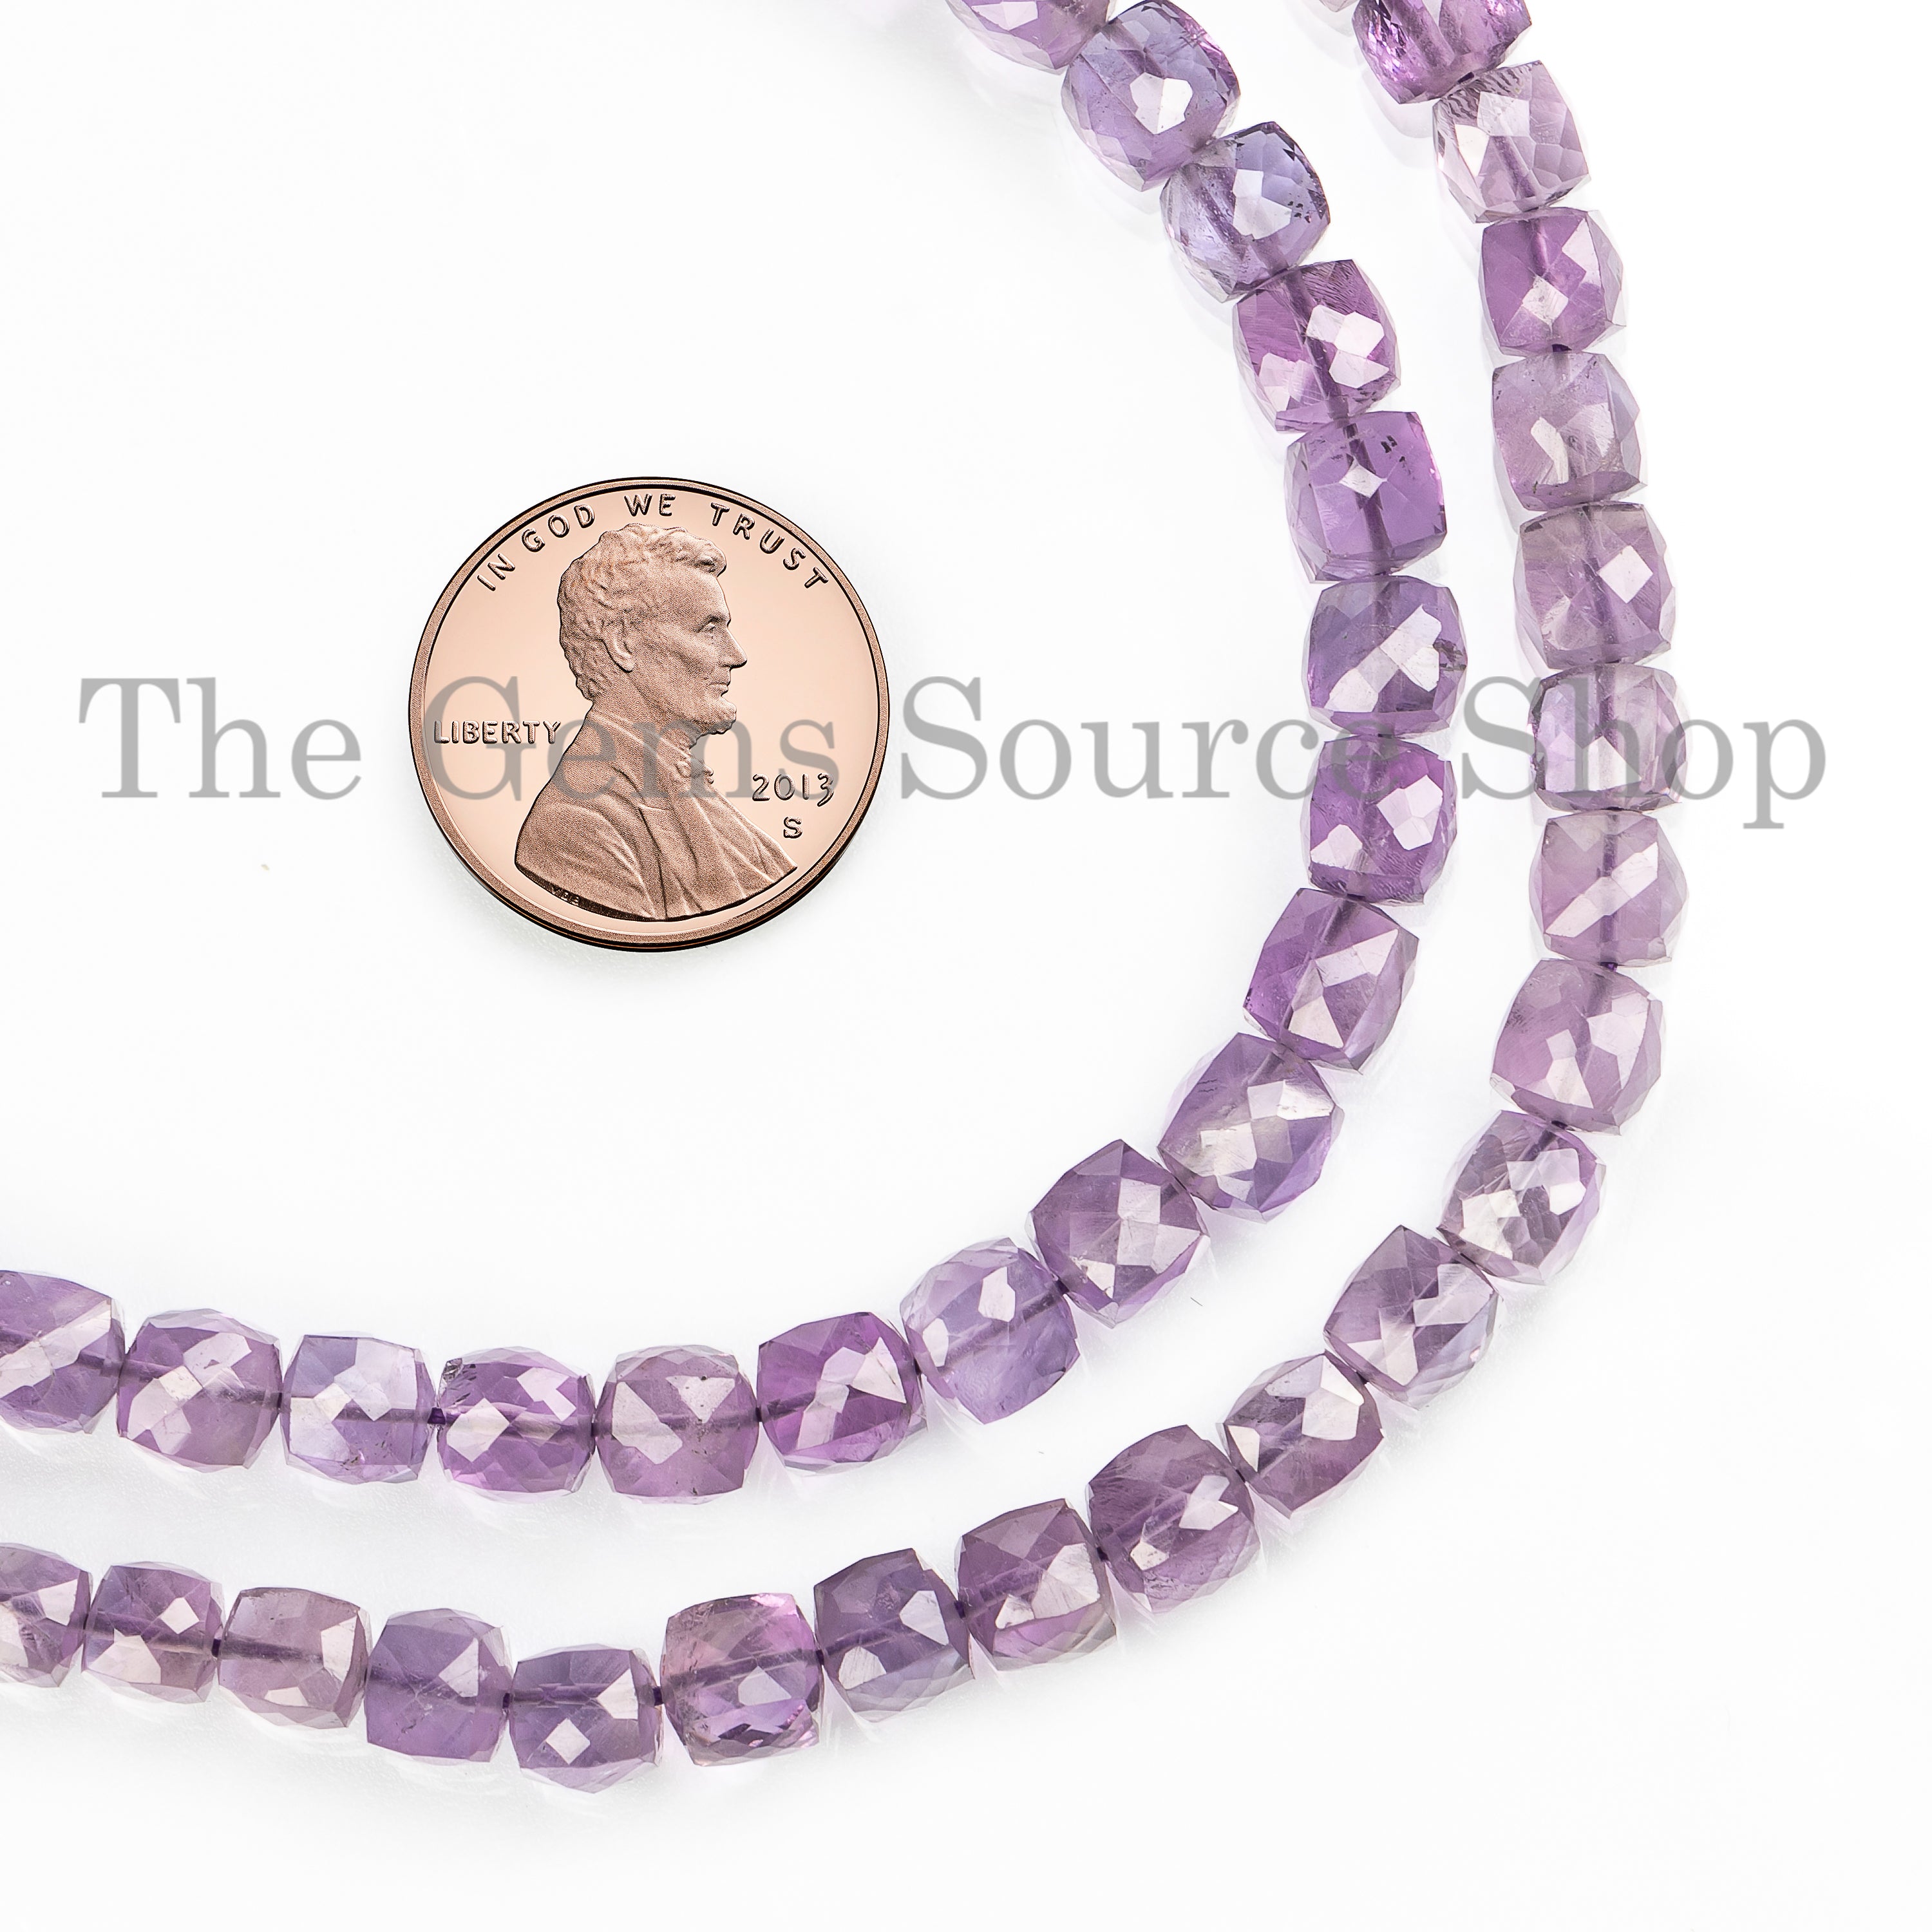 4.5-6.5mm Amethyst Faceted Box Shape Beads, Amethyst Beads, Amethyst Cube Beads, Amethyst Faceted Beads, Gemstone Beads Briolettes